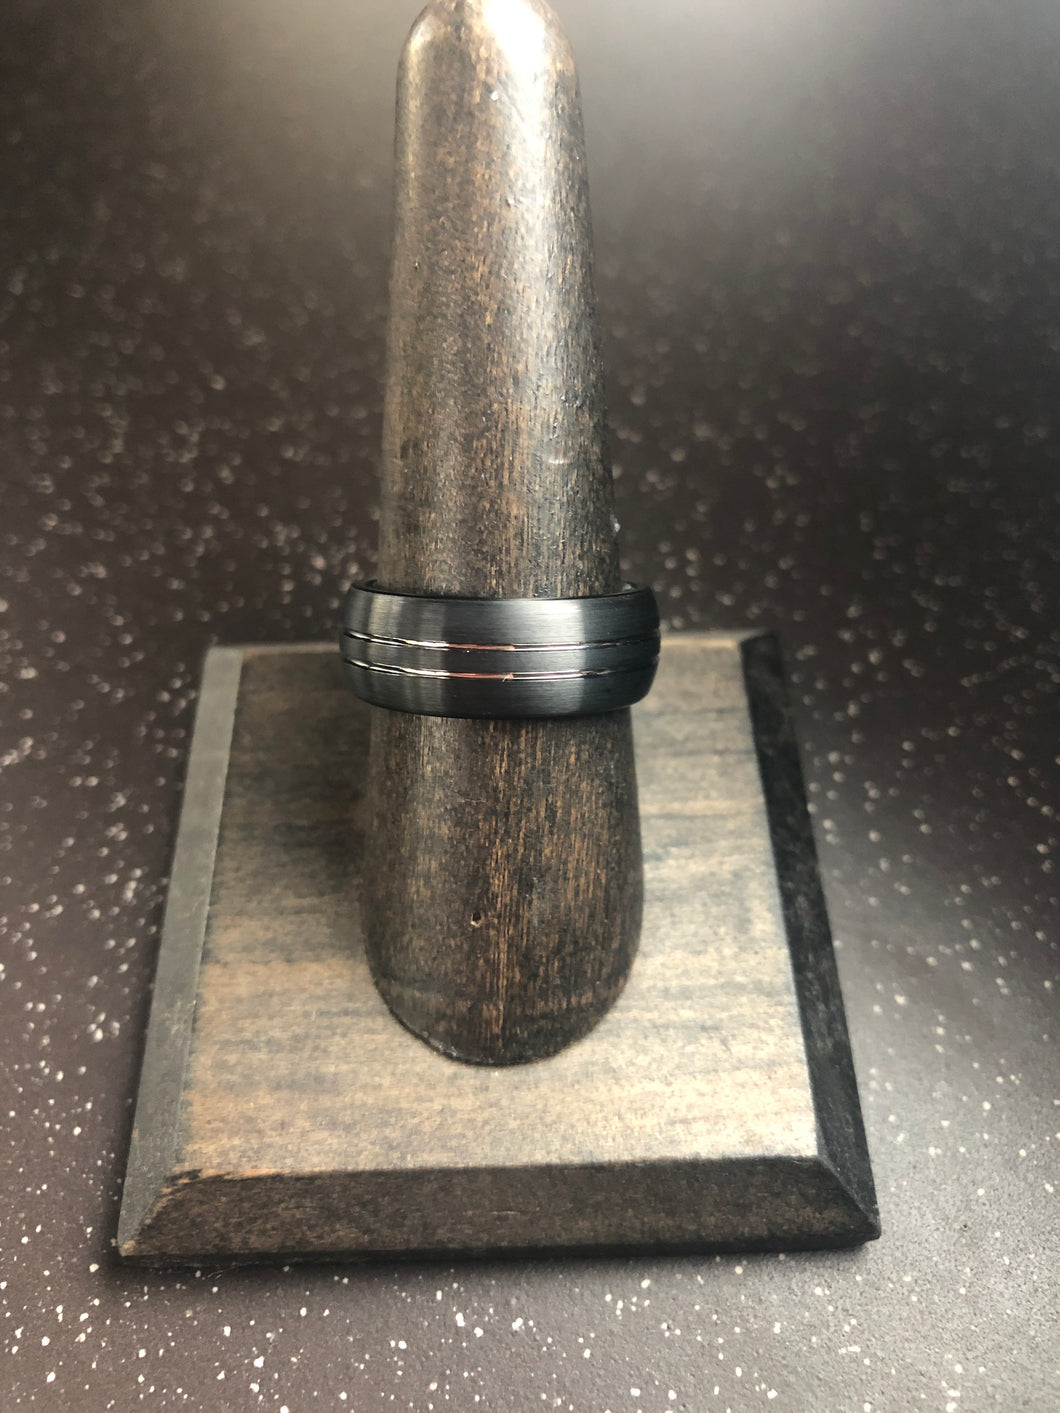 The Tungsten 309 Ring